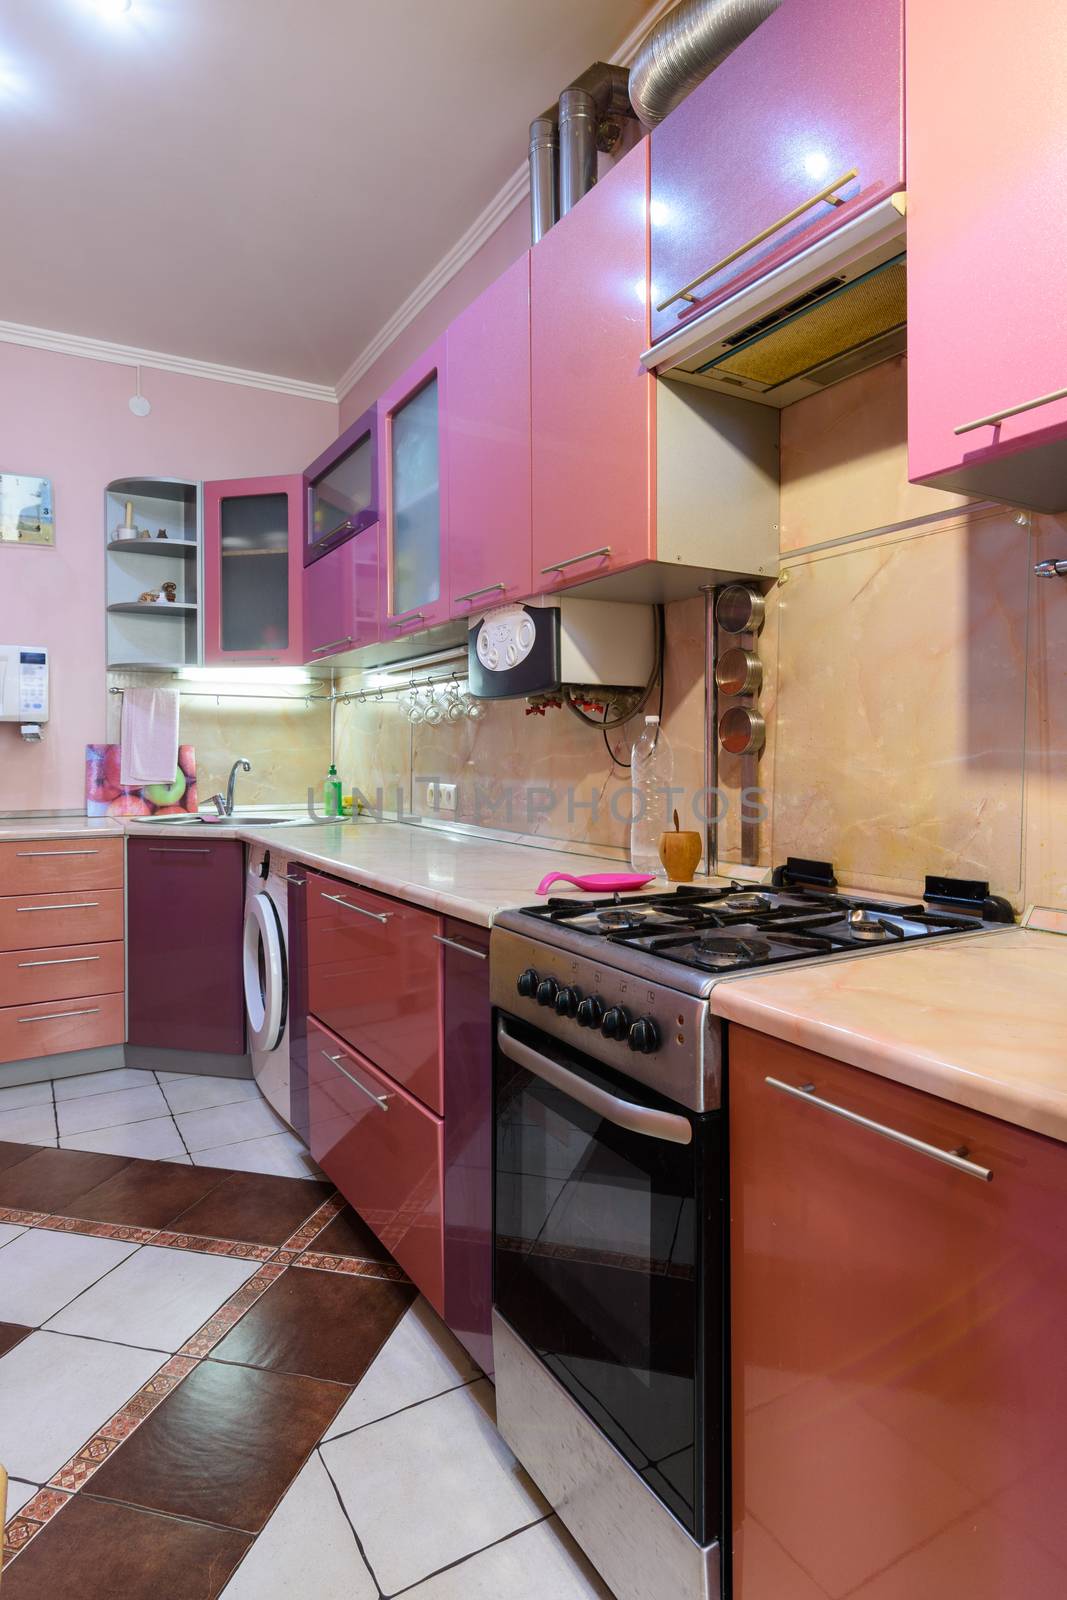 Kitchen set in an apartment for rent, vertical frame